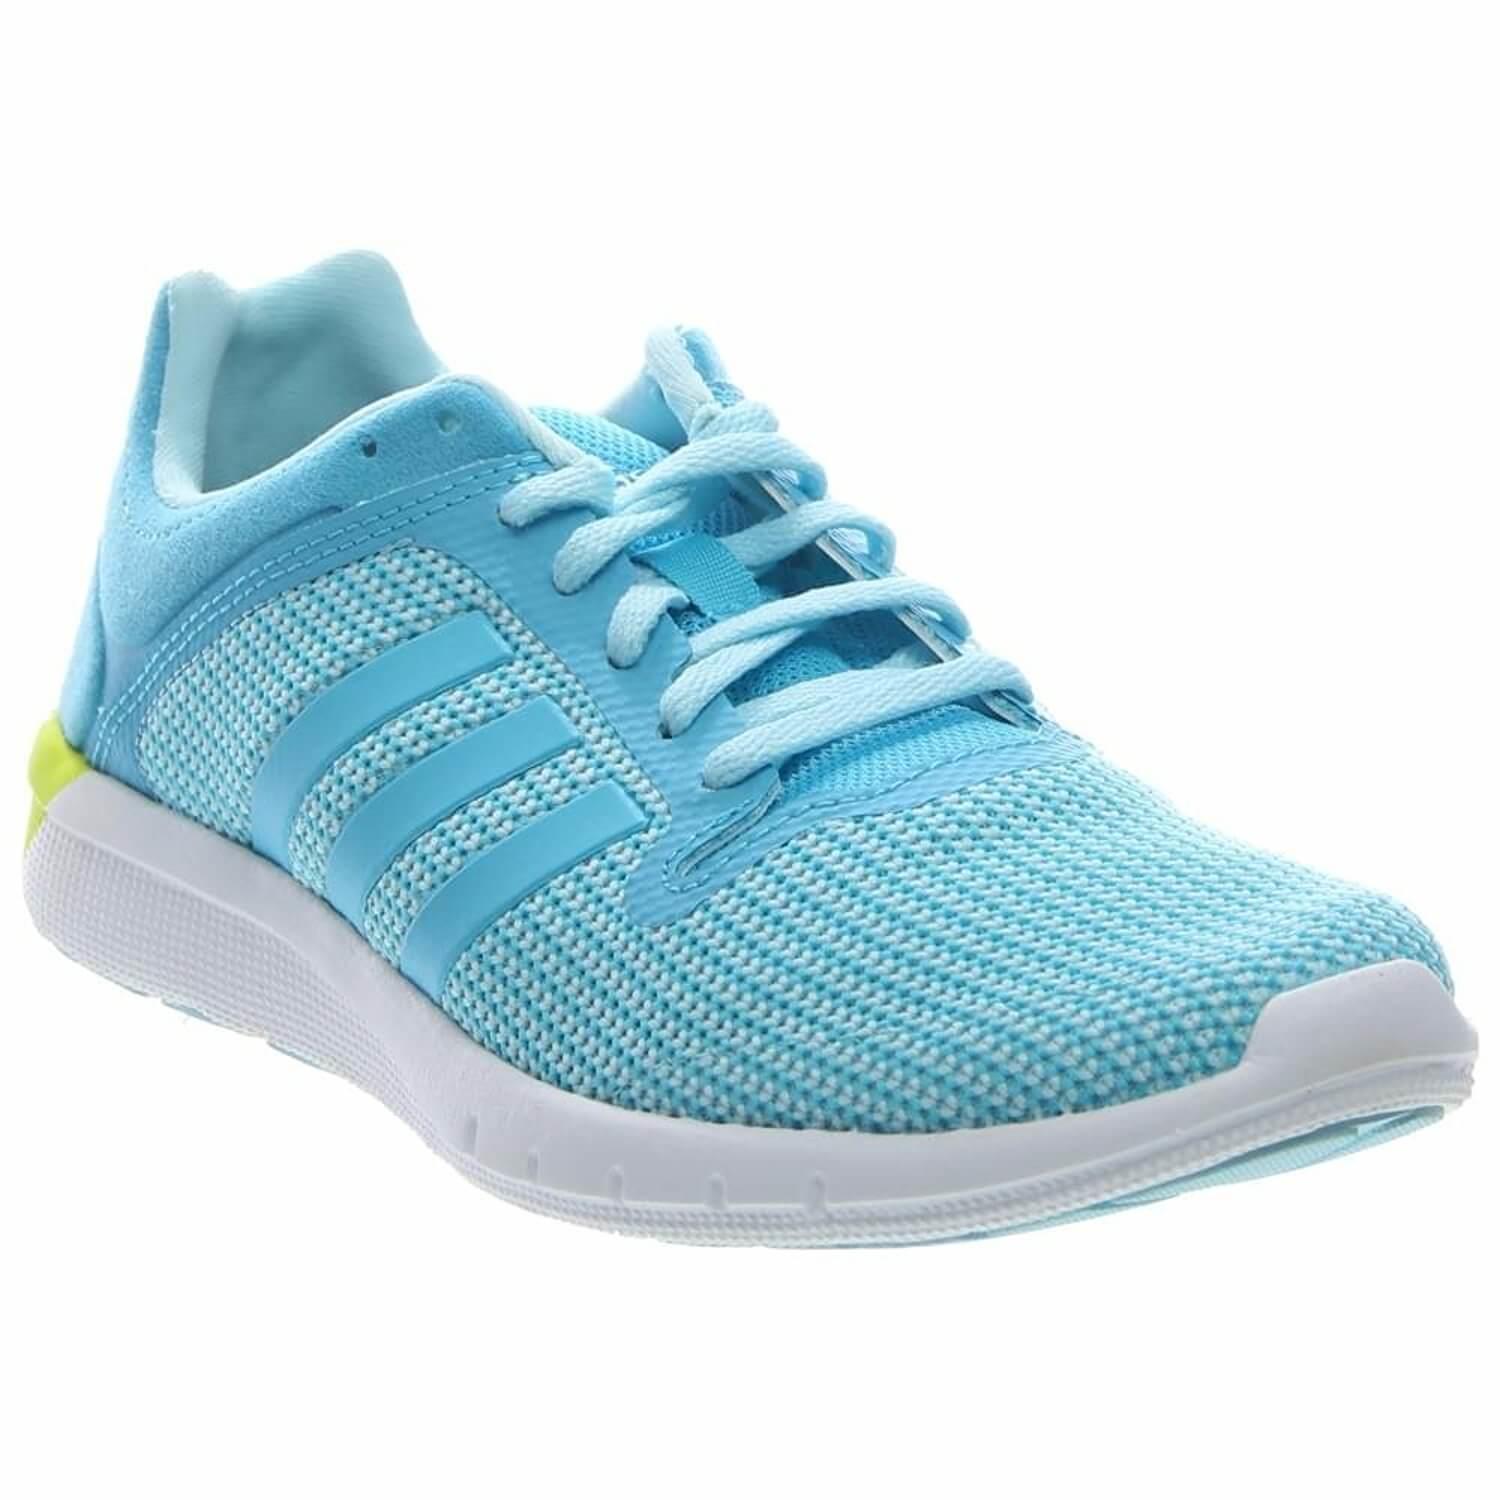 adidas climacool 2018 buy clothes shoes 